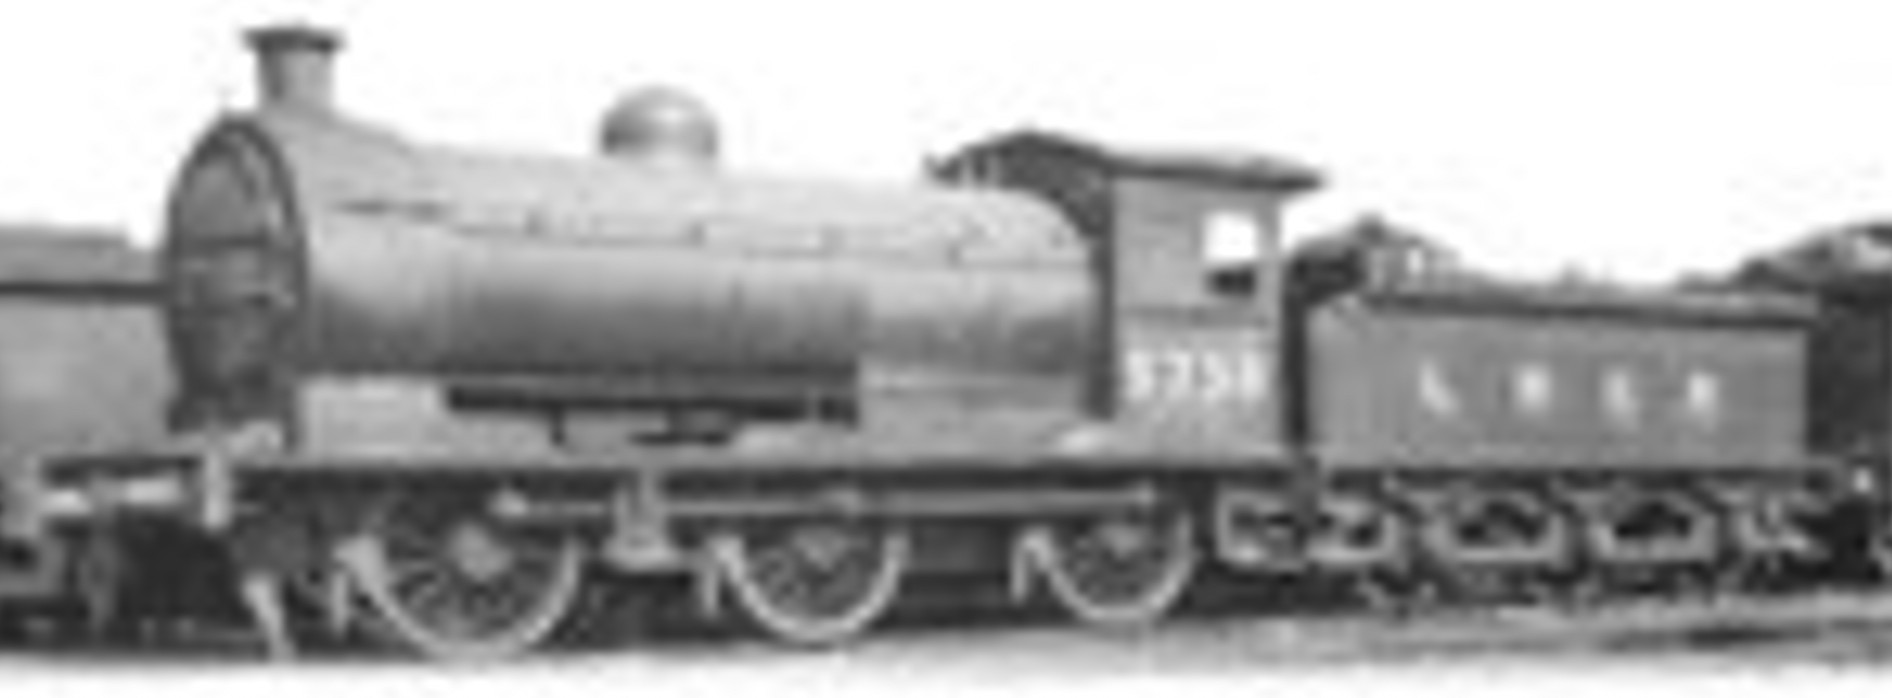 Lner 0-6-0 CLASS J26 5738 SOUND FITTED